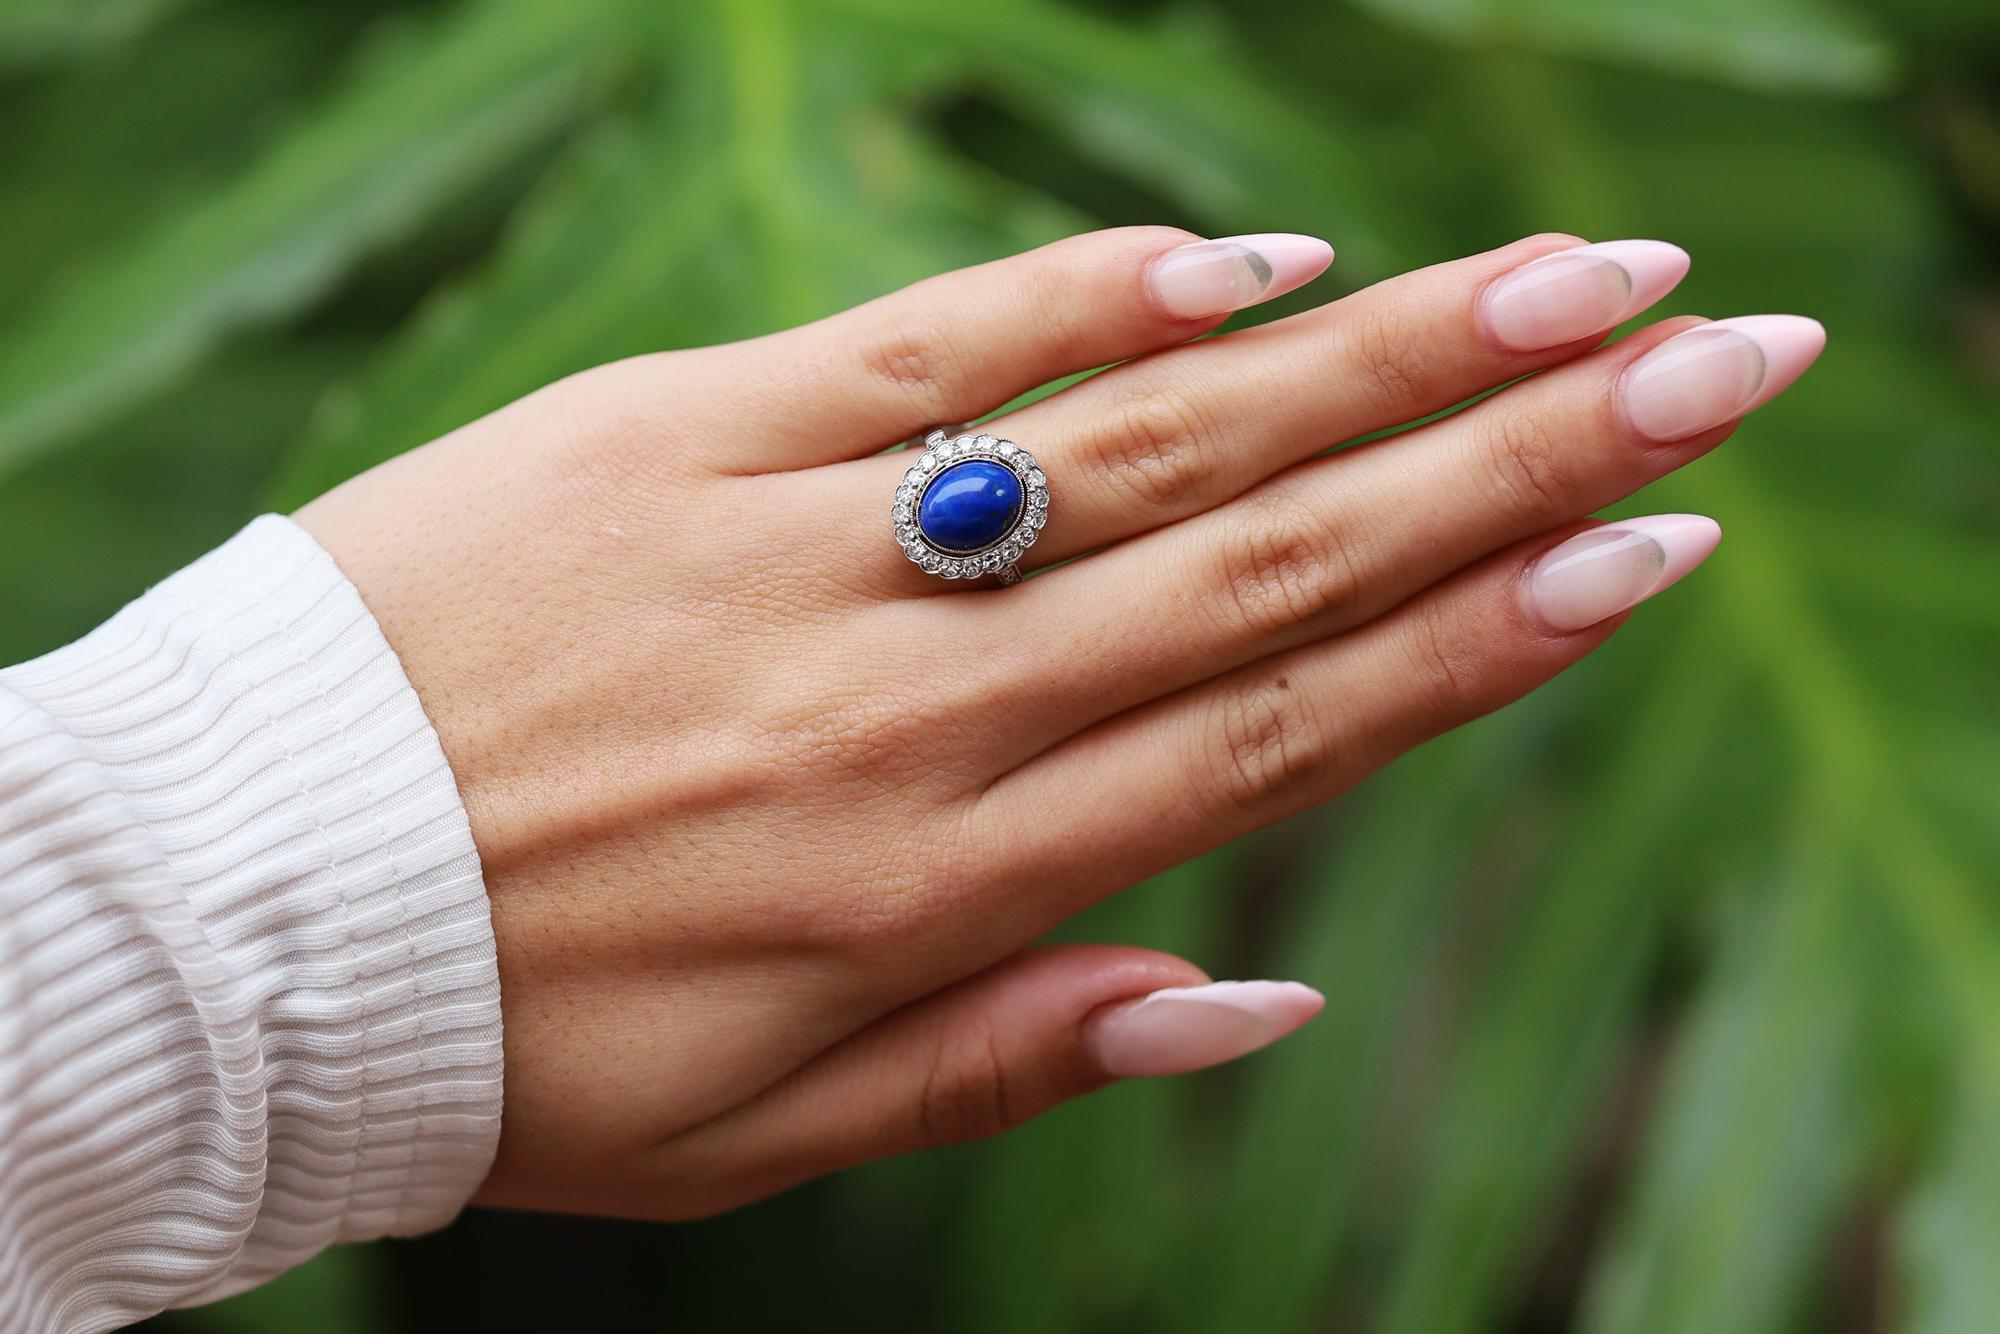 A vibrant, lovely and lustrous Lapis Lazuli gemstone of a pure cobalt blue commands your attention in this non-traditional engagement ring. Encircled by a scalloped platinum halo of sparkling round diamonds along with a divinely filigreed under